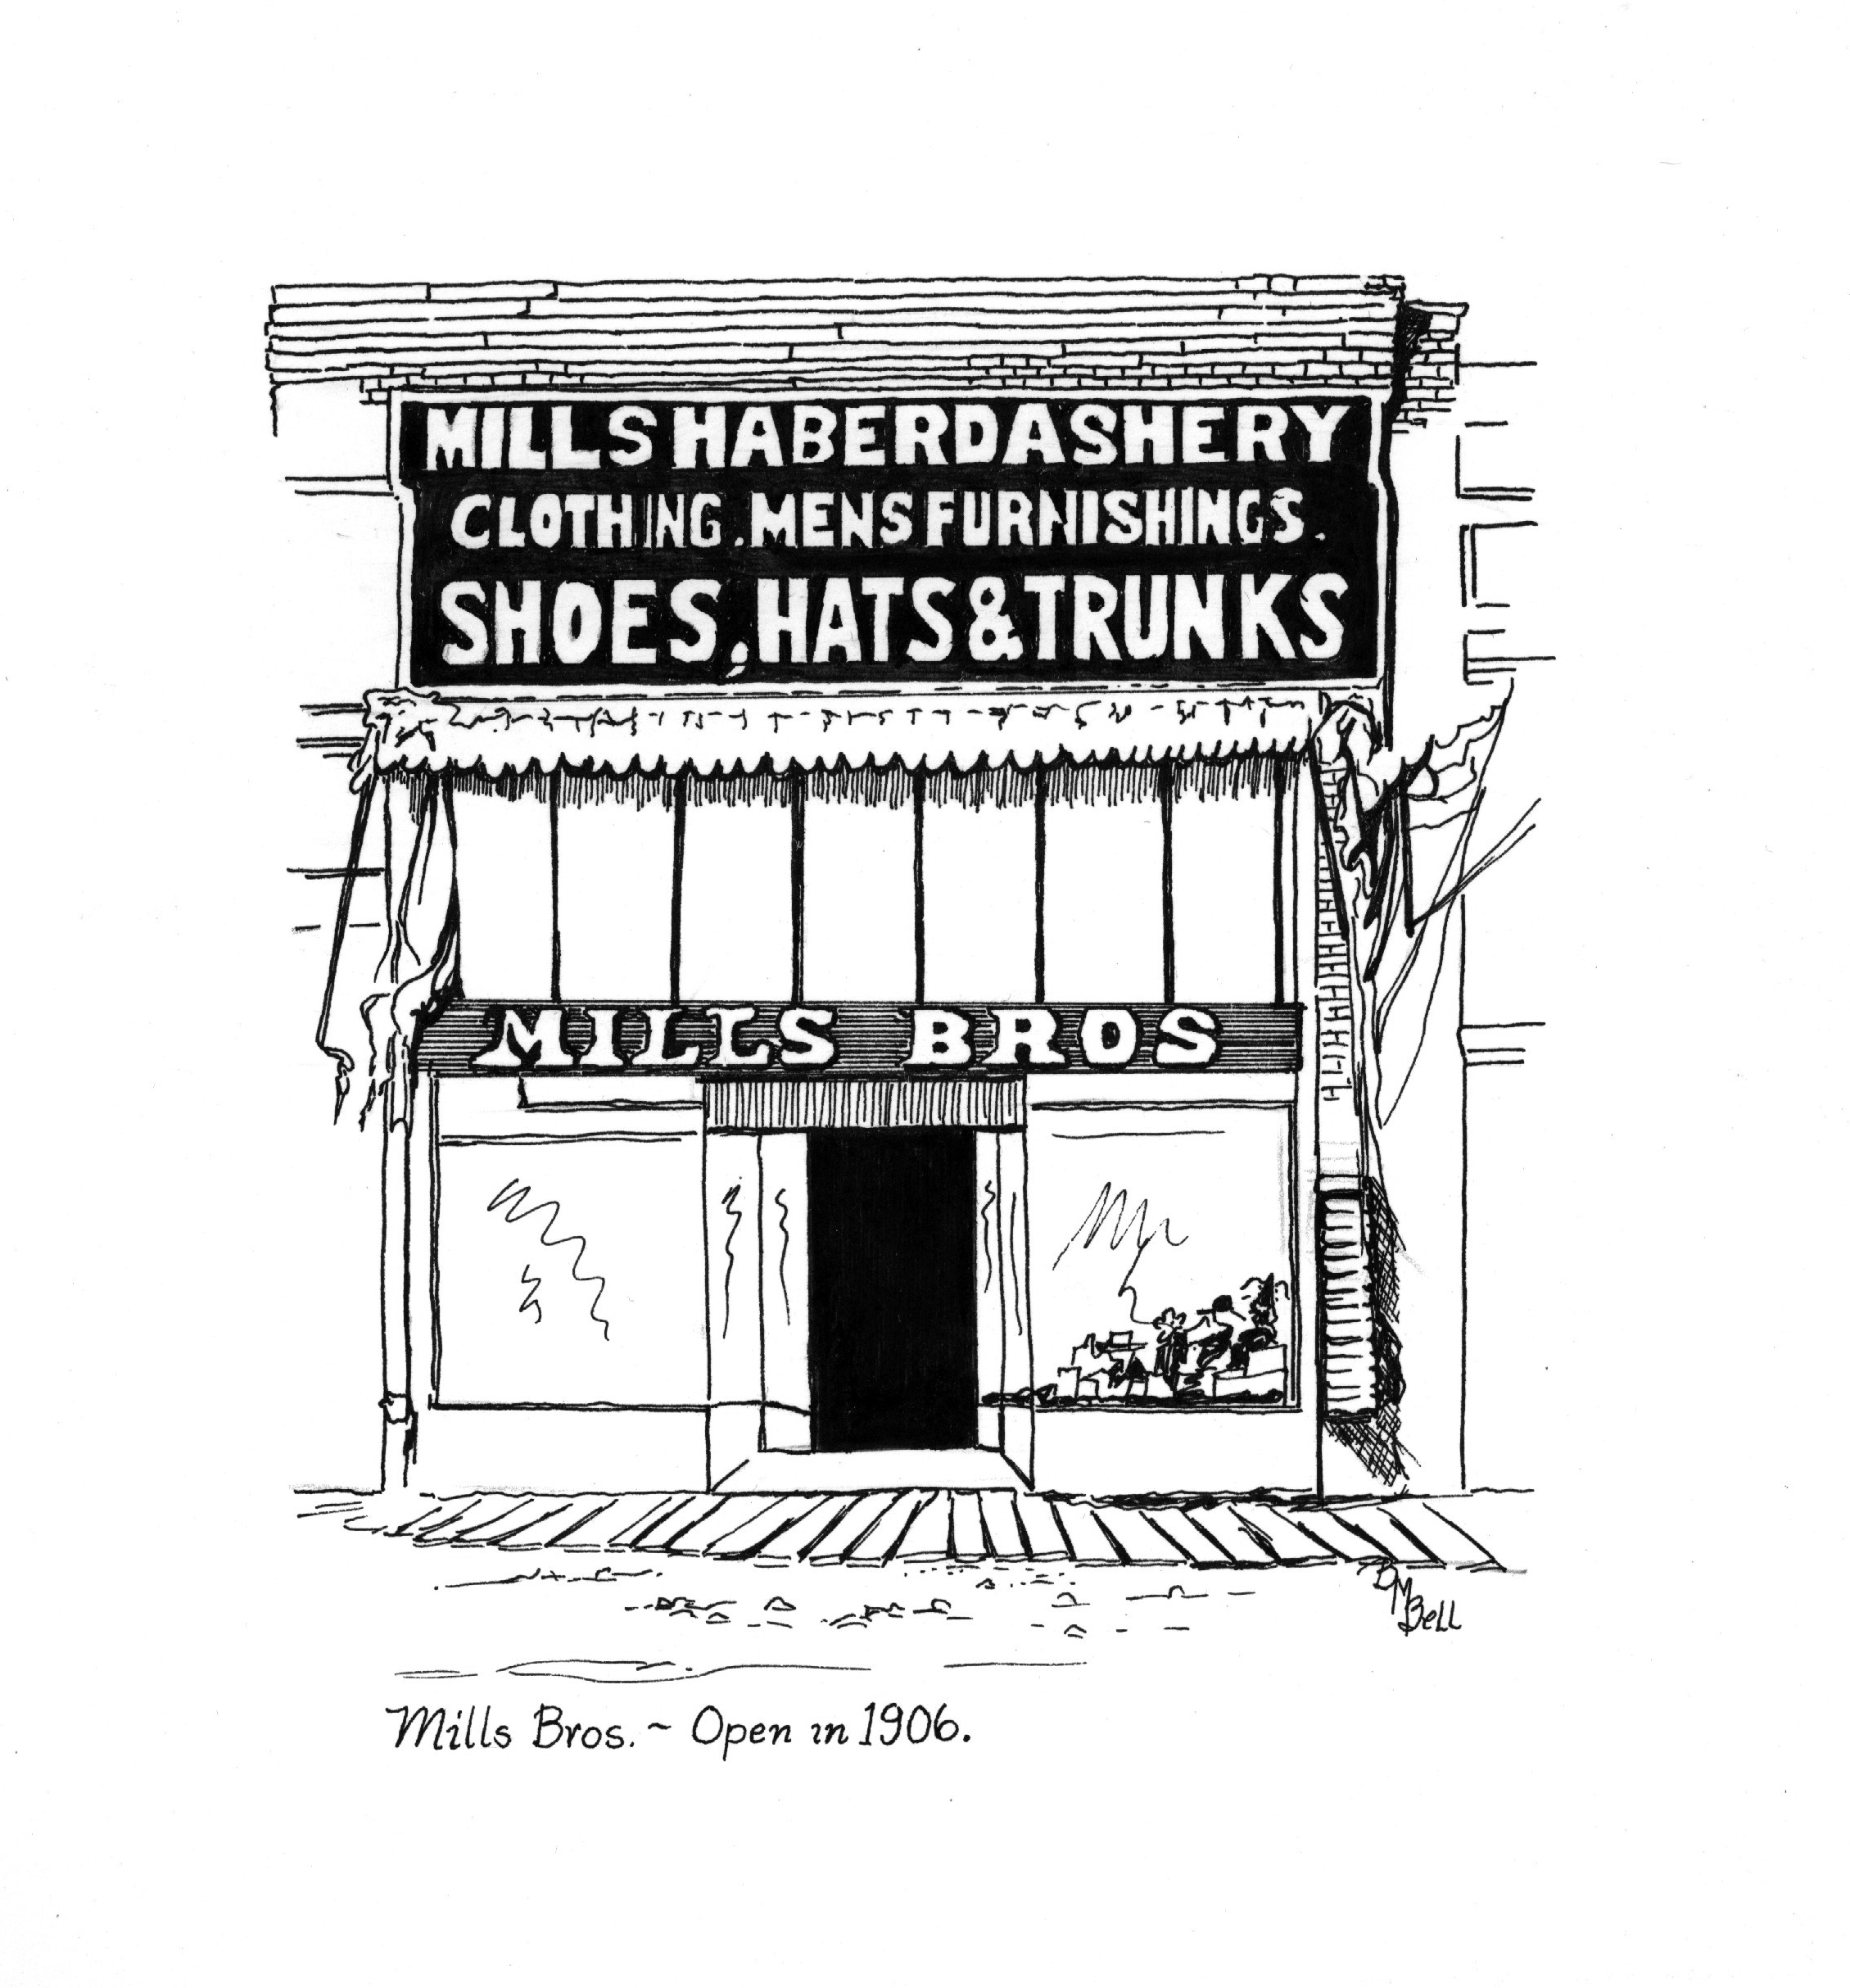 Mills Brothers as it was in 1906 when it first opened.